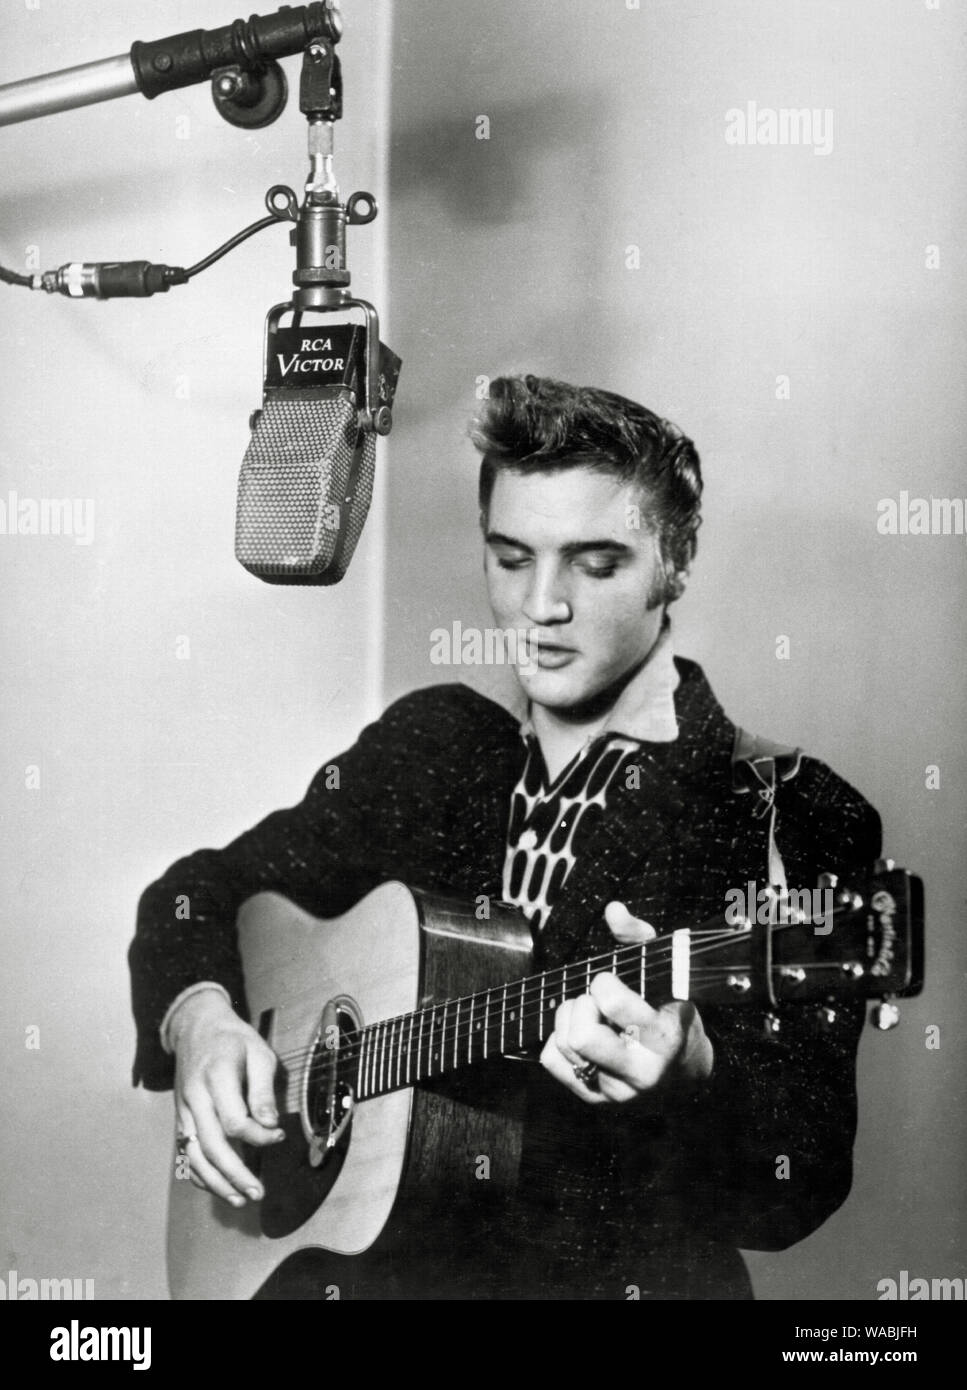 Elvis Presley in RCA Victor's New York studios in November 1955, posing for his first official publicity shots for his new record company  File Reference # 33848-093THA Stock Photo